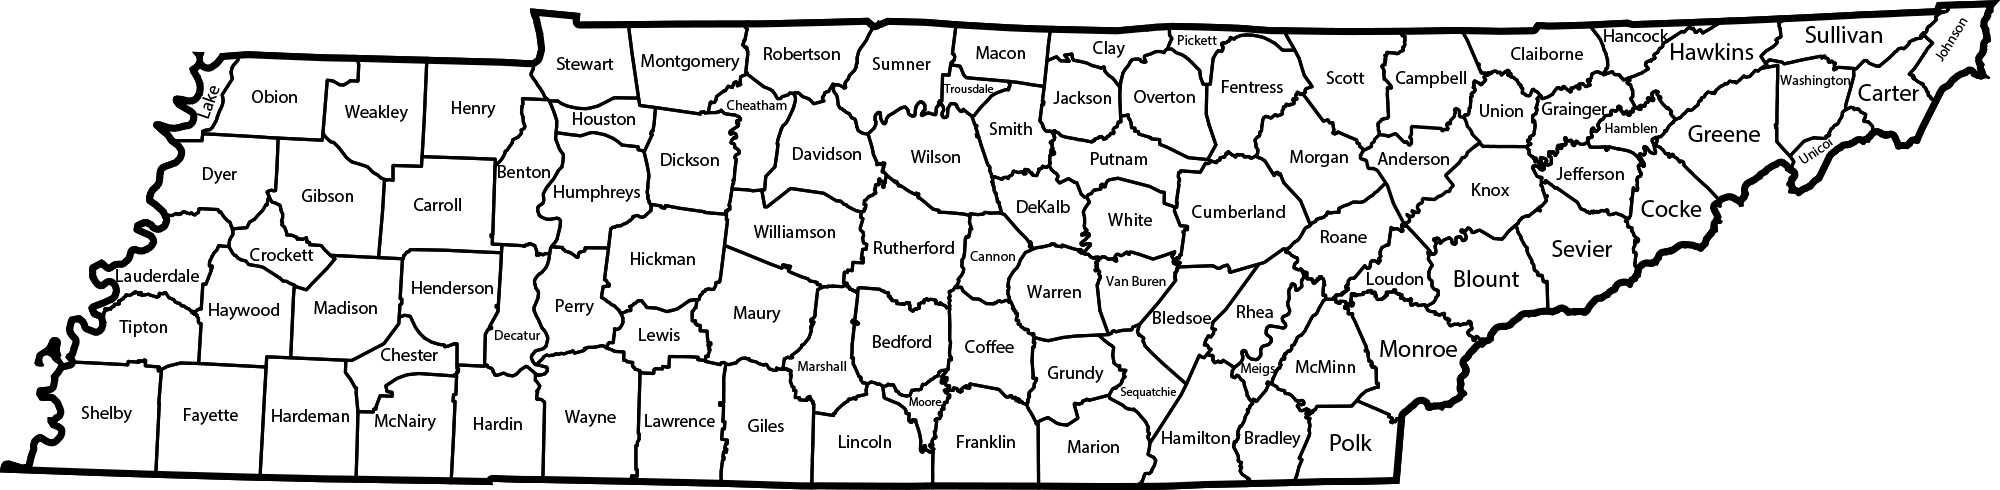 List Of Counties In Tennessee Familypedia FANDOM 